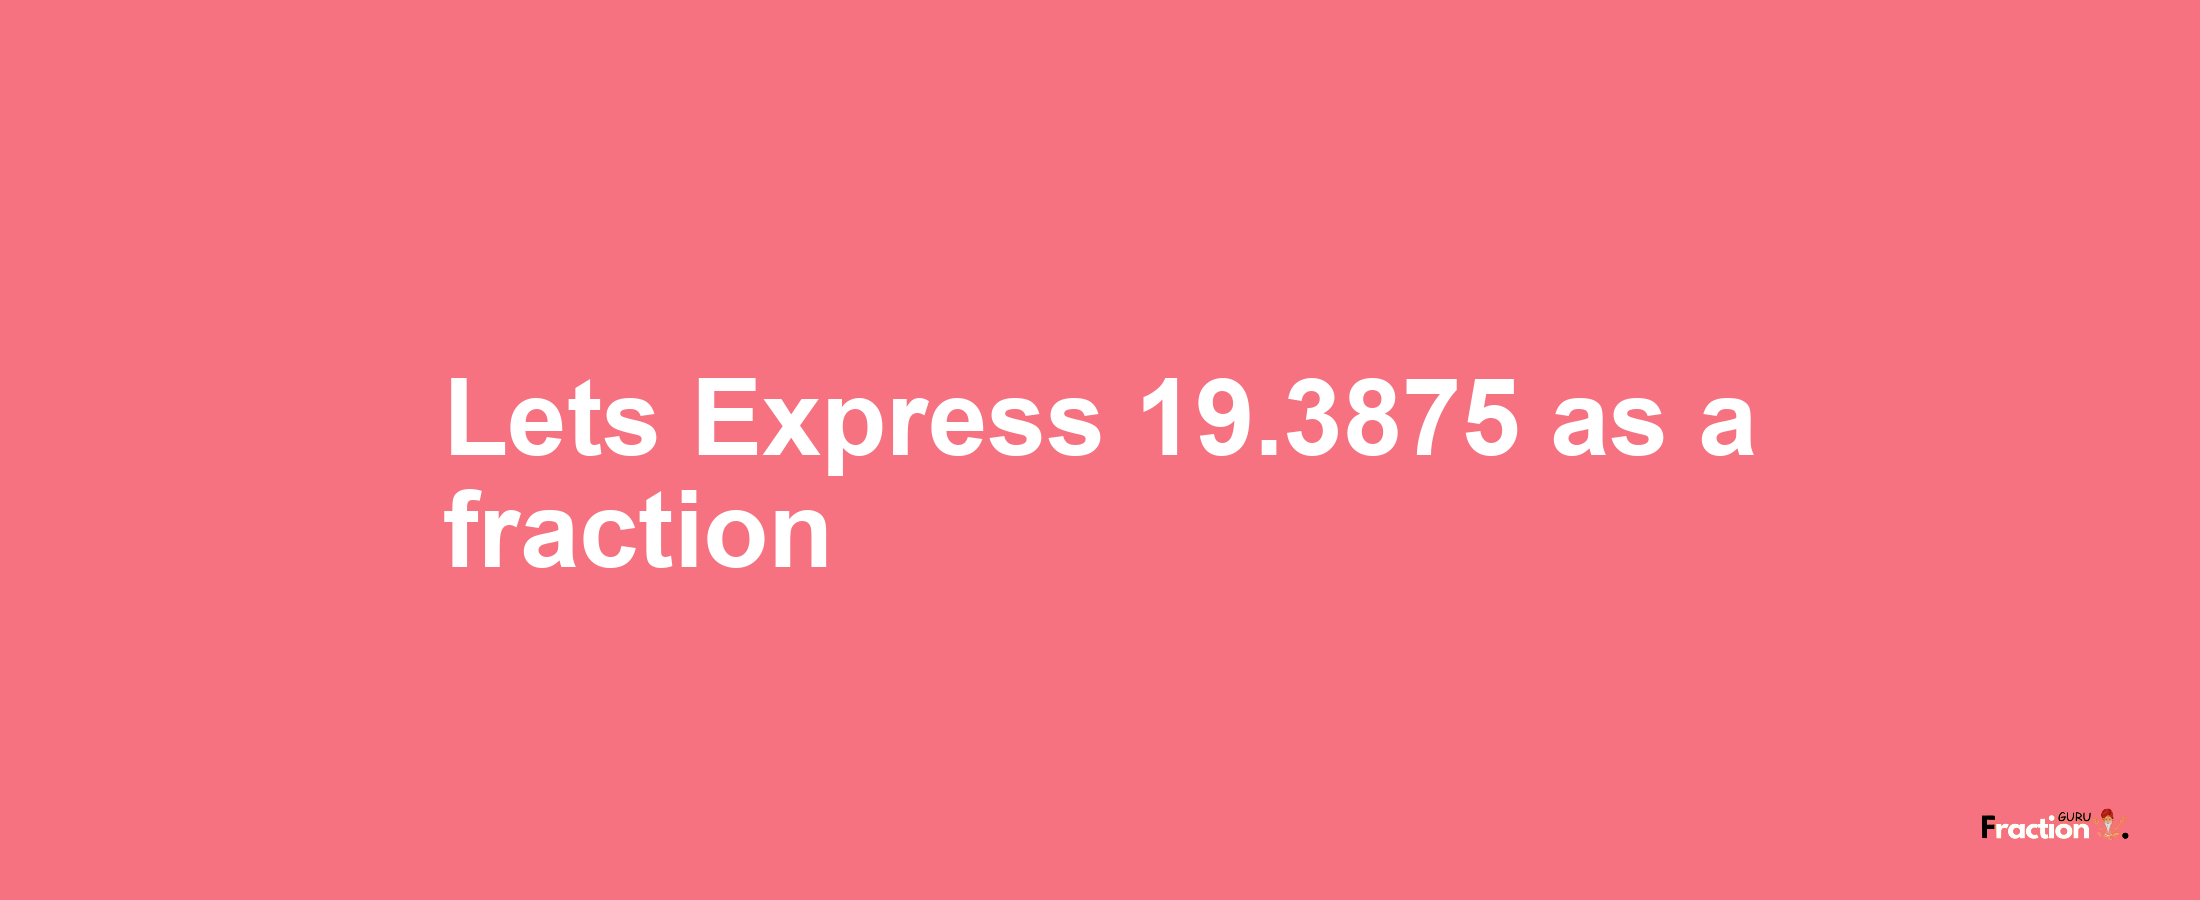 Lets Express 19.3875 as afraction